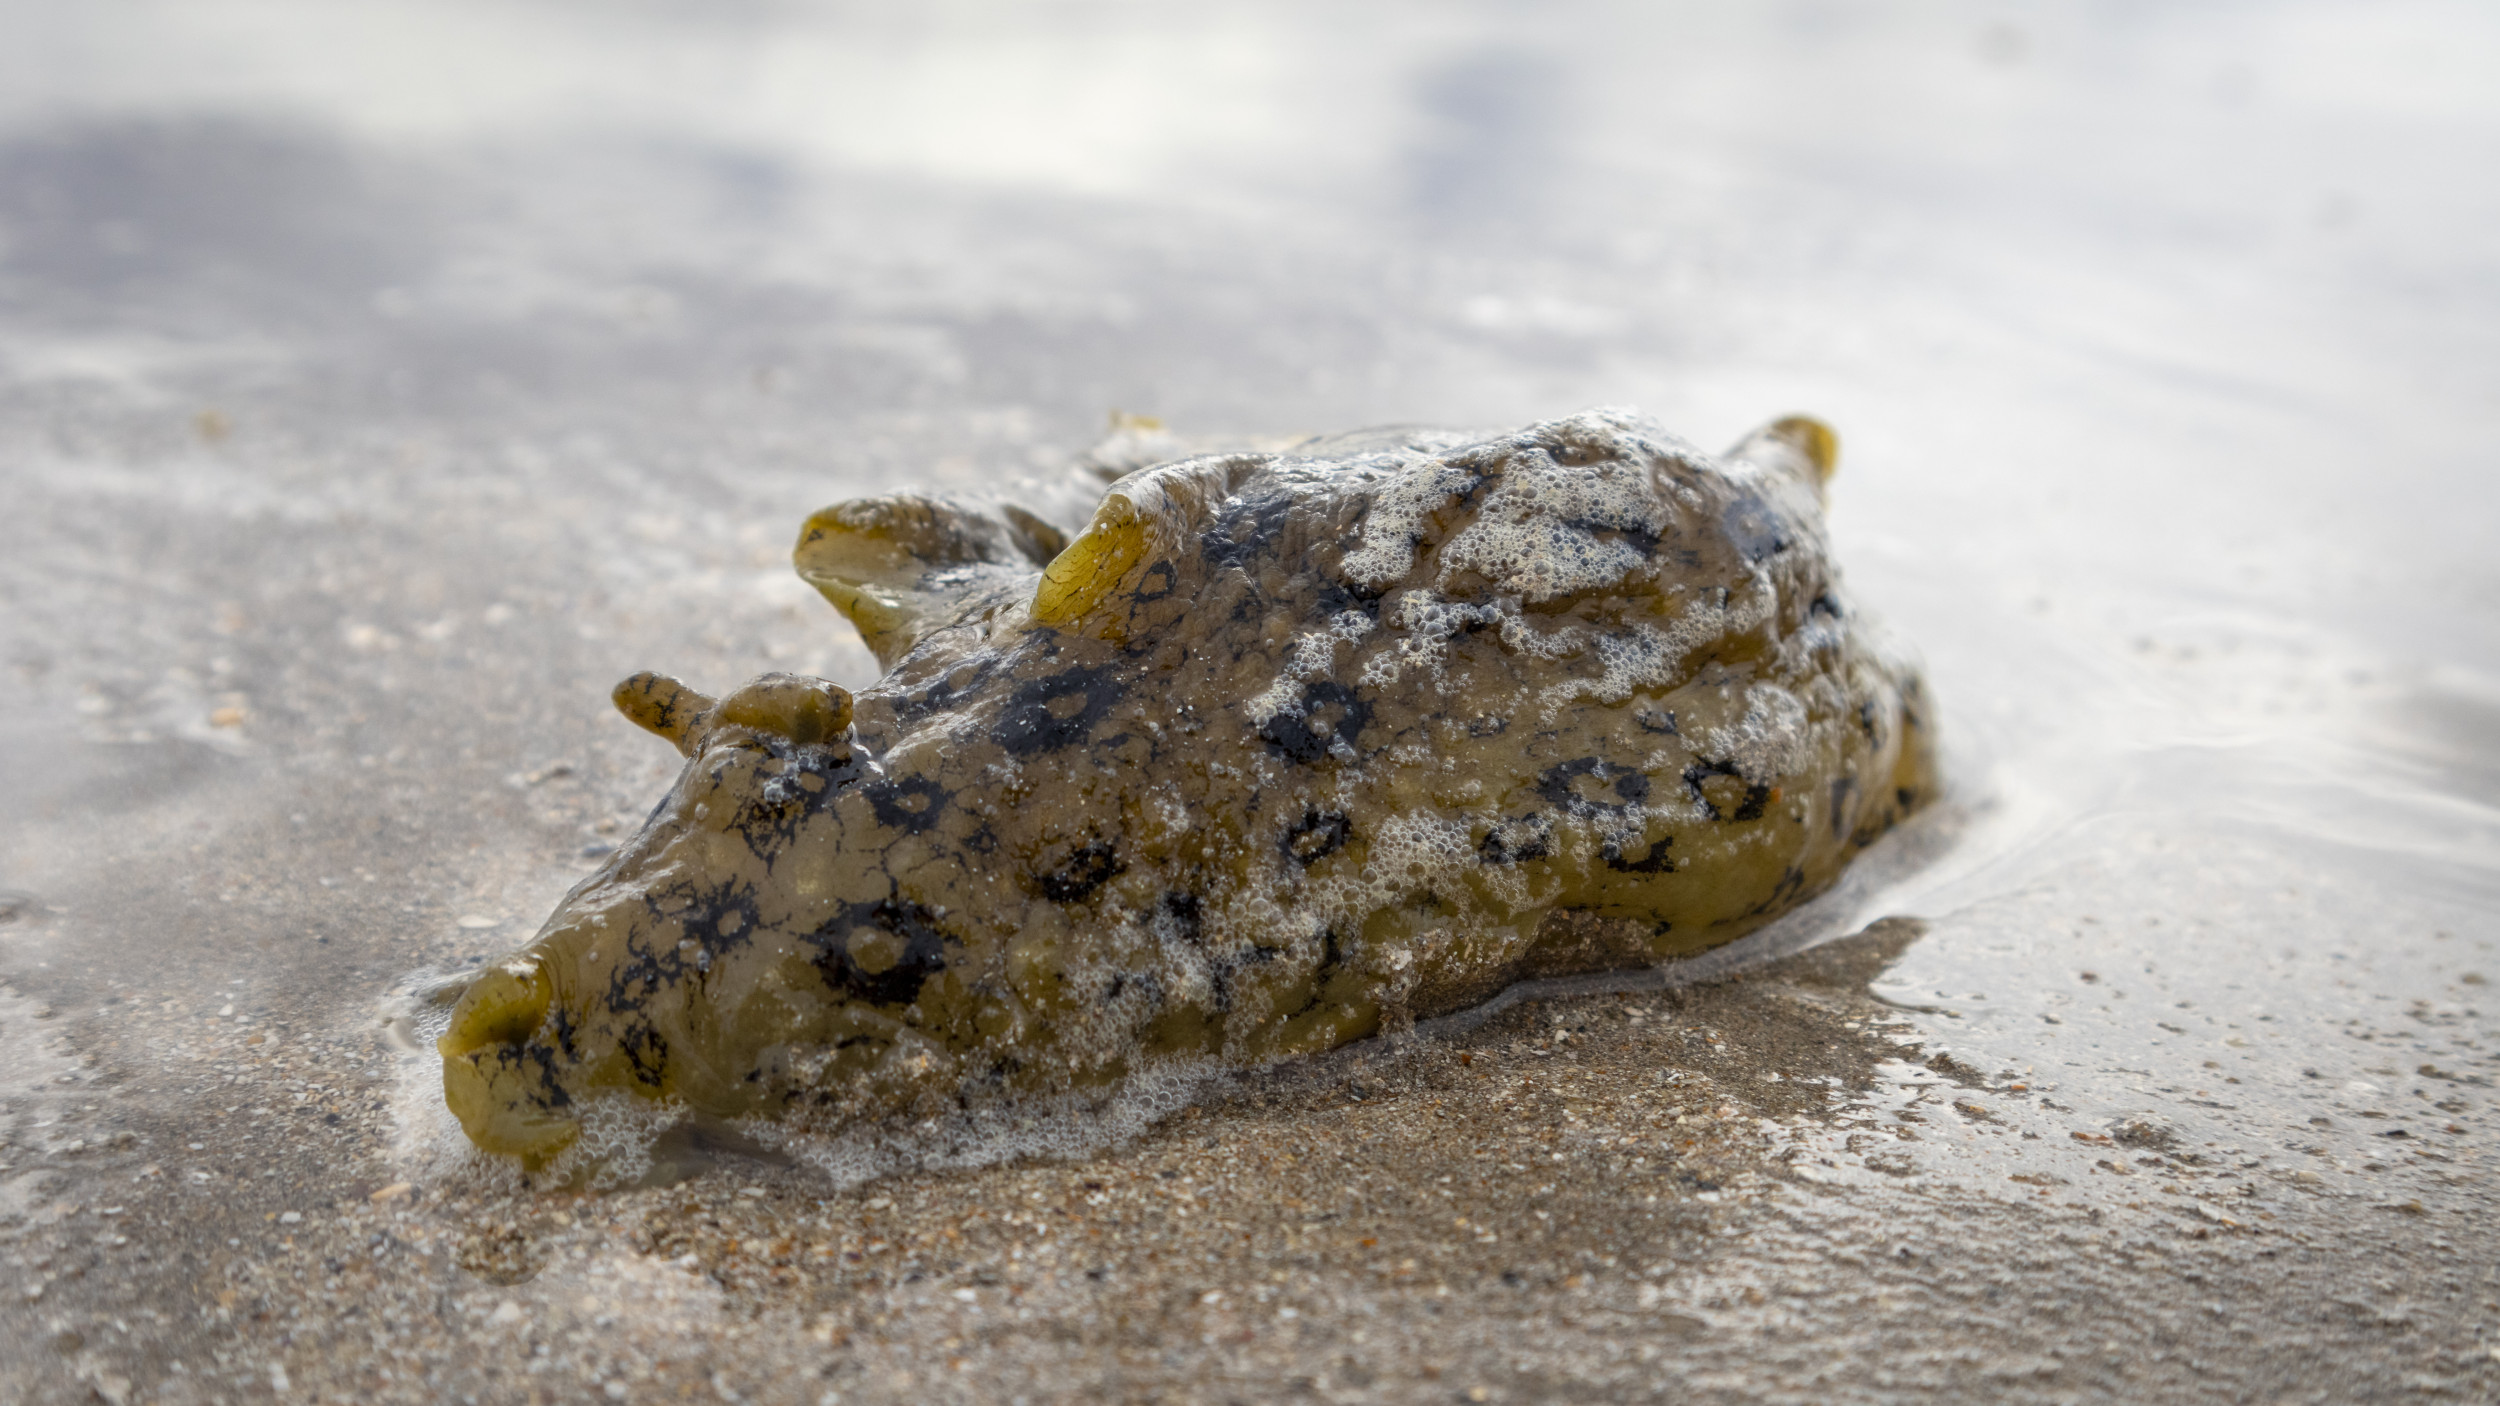 Alien' Sea Creatures Baffle Locals As They Wash Up on Beaches